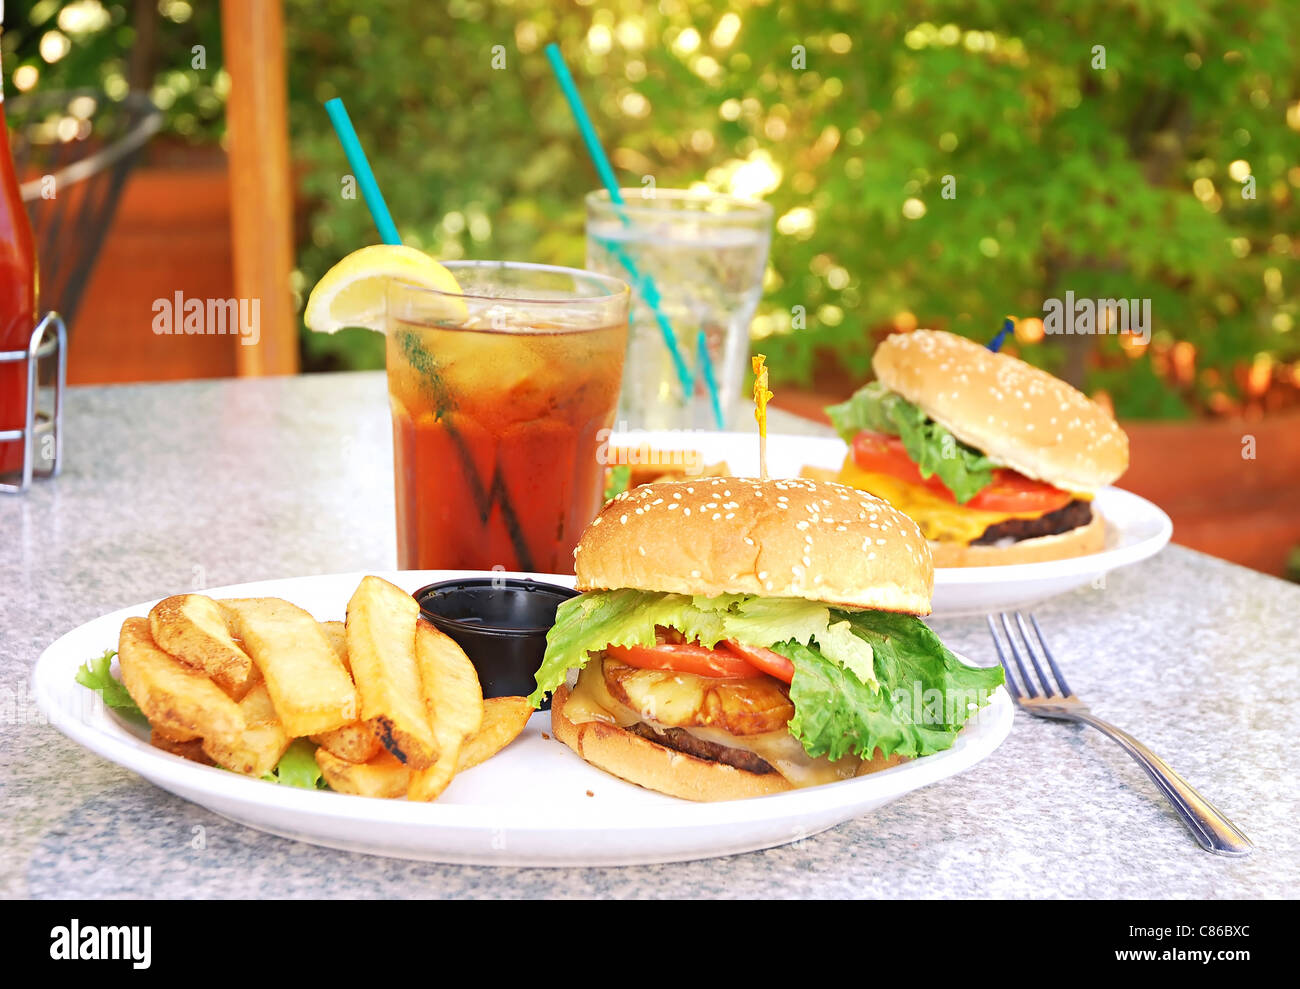 Two burgers on table at outdoor restaurant Stock Photo